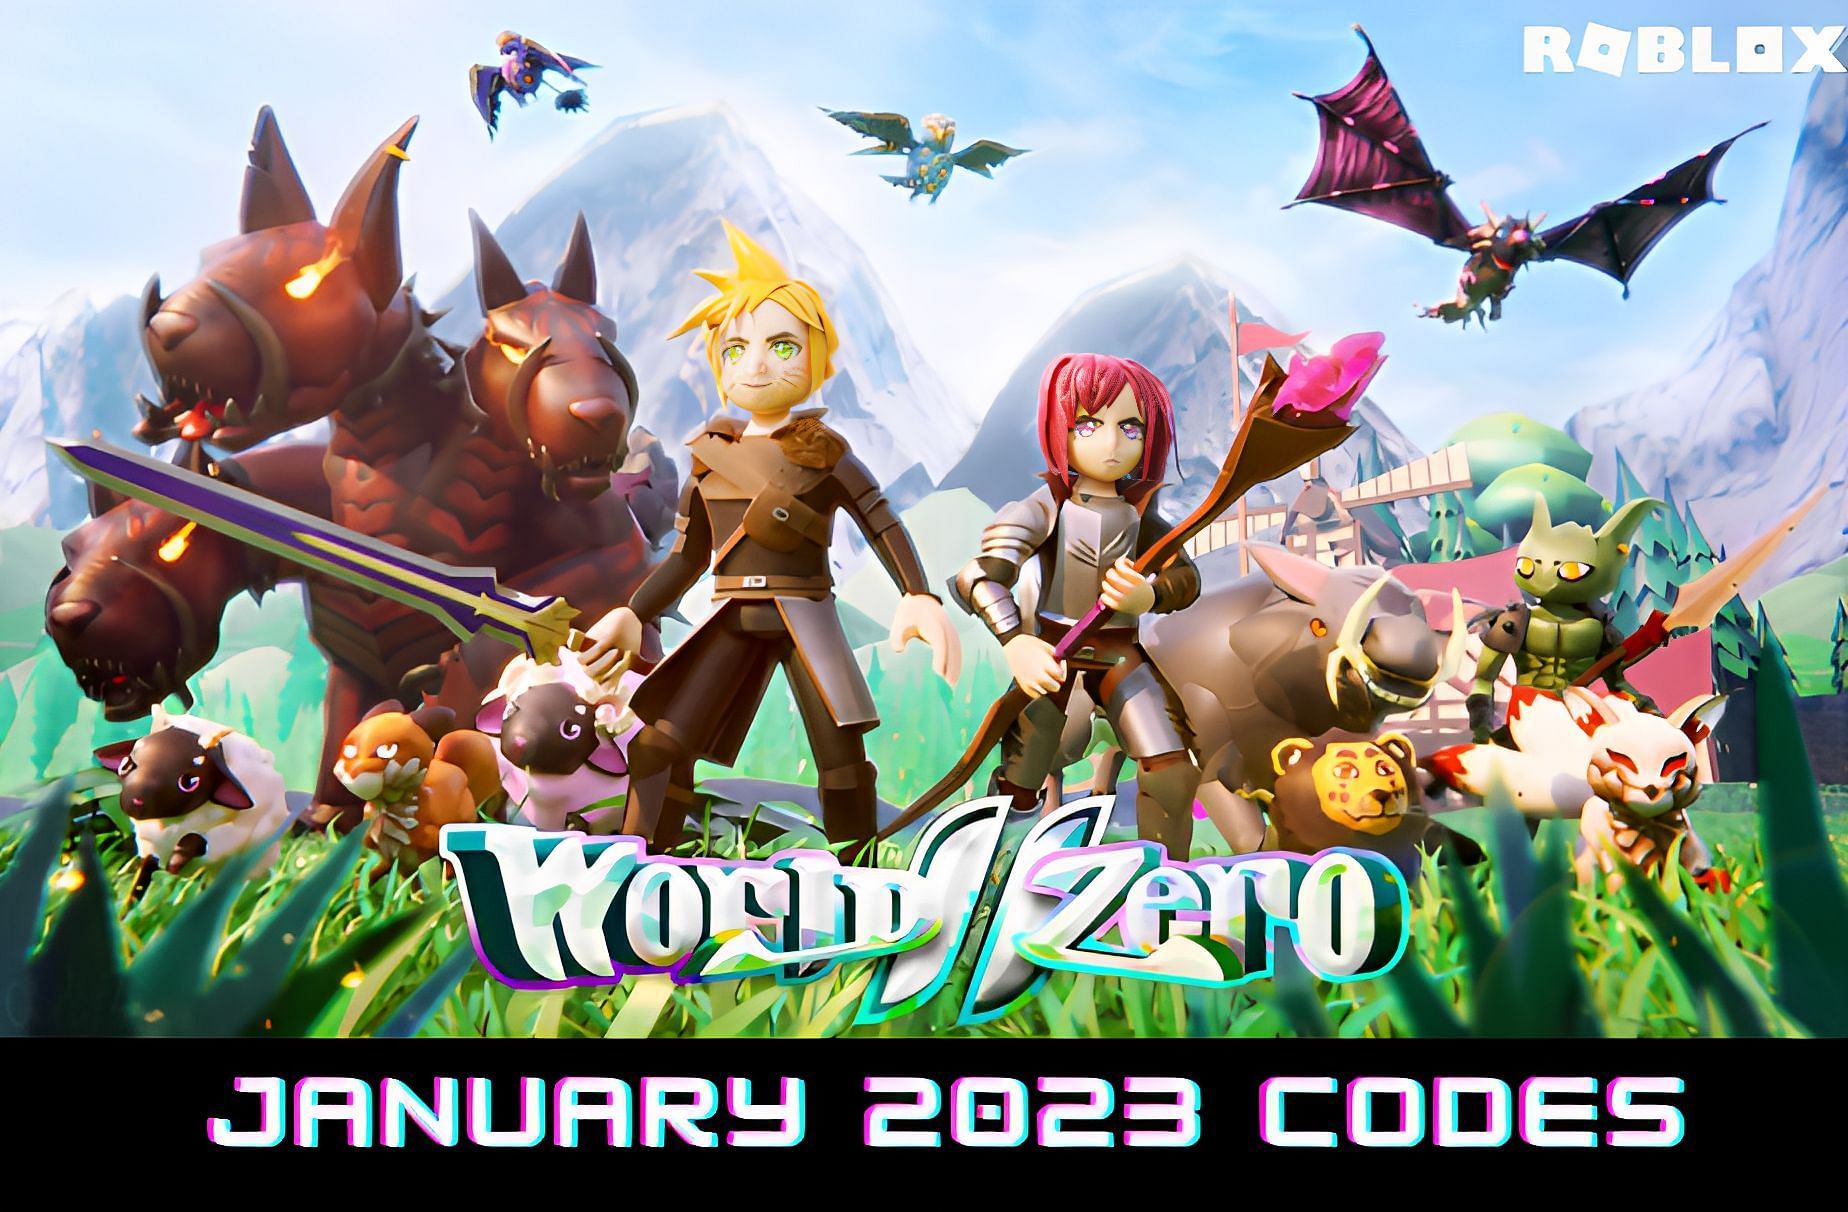 Project New World Codes January 2023